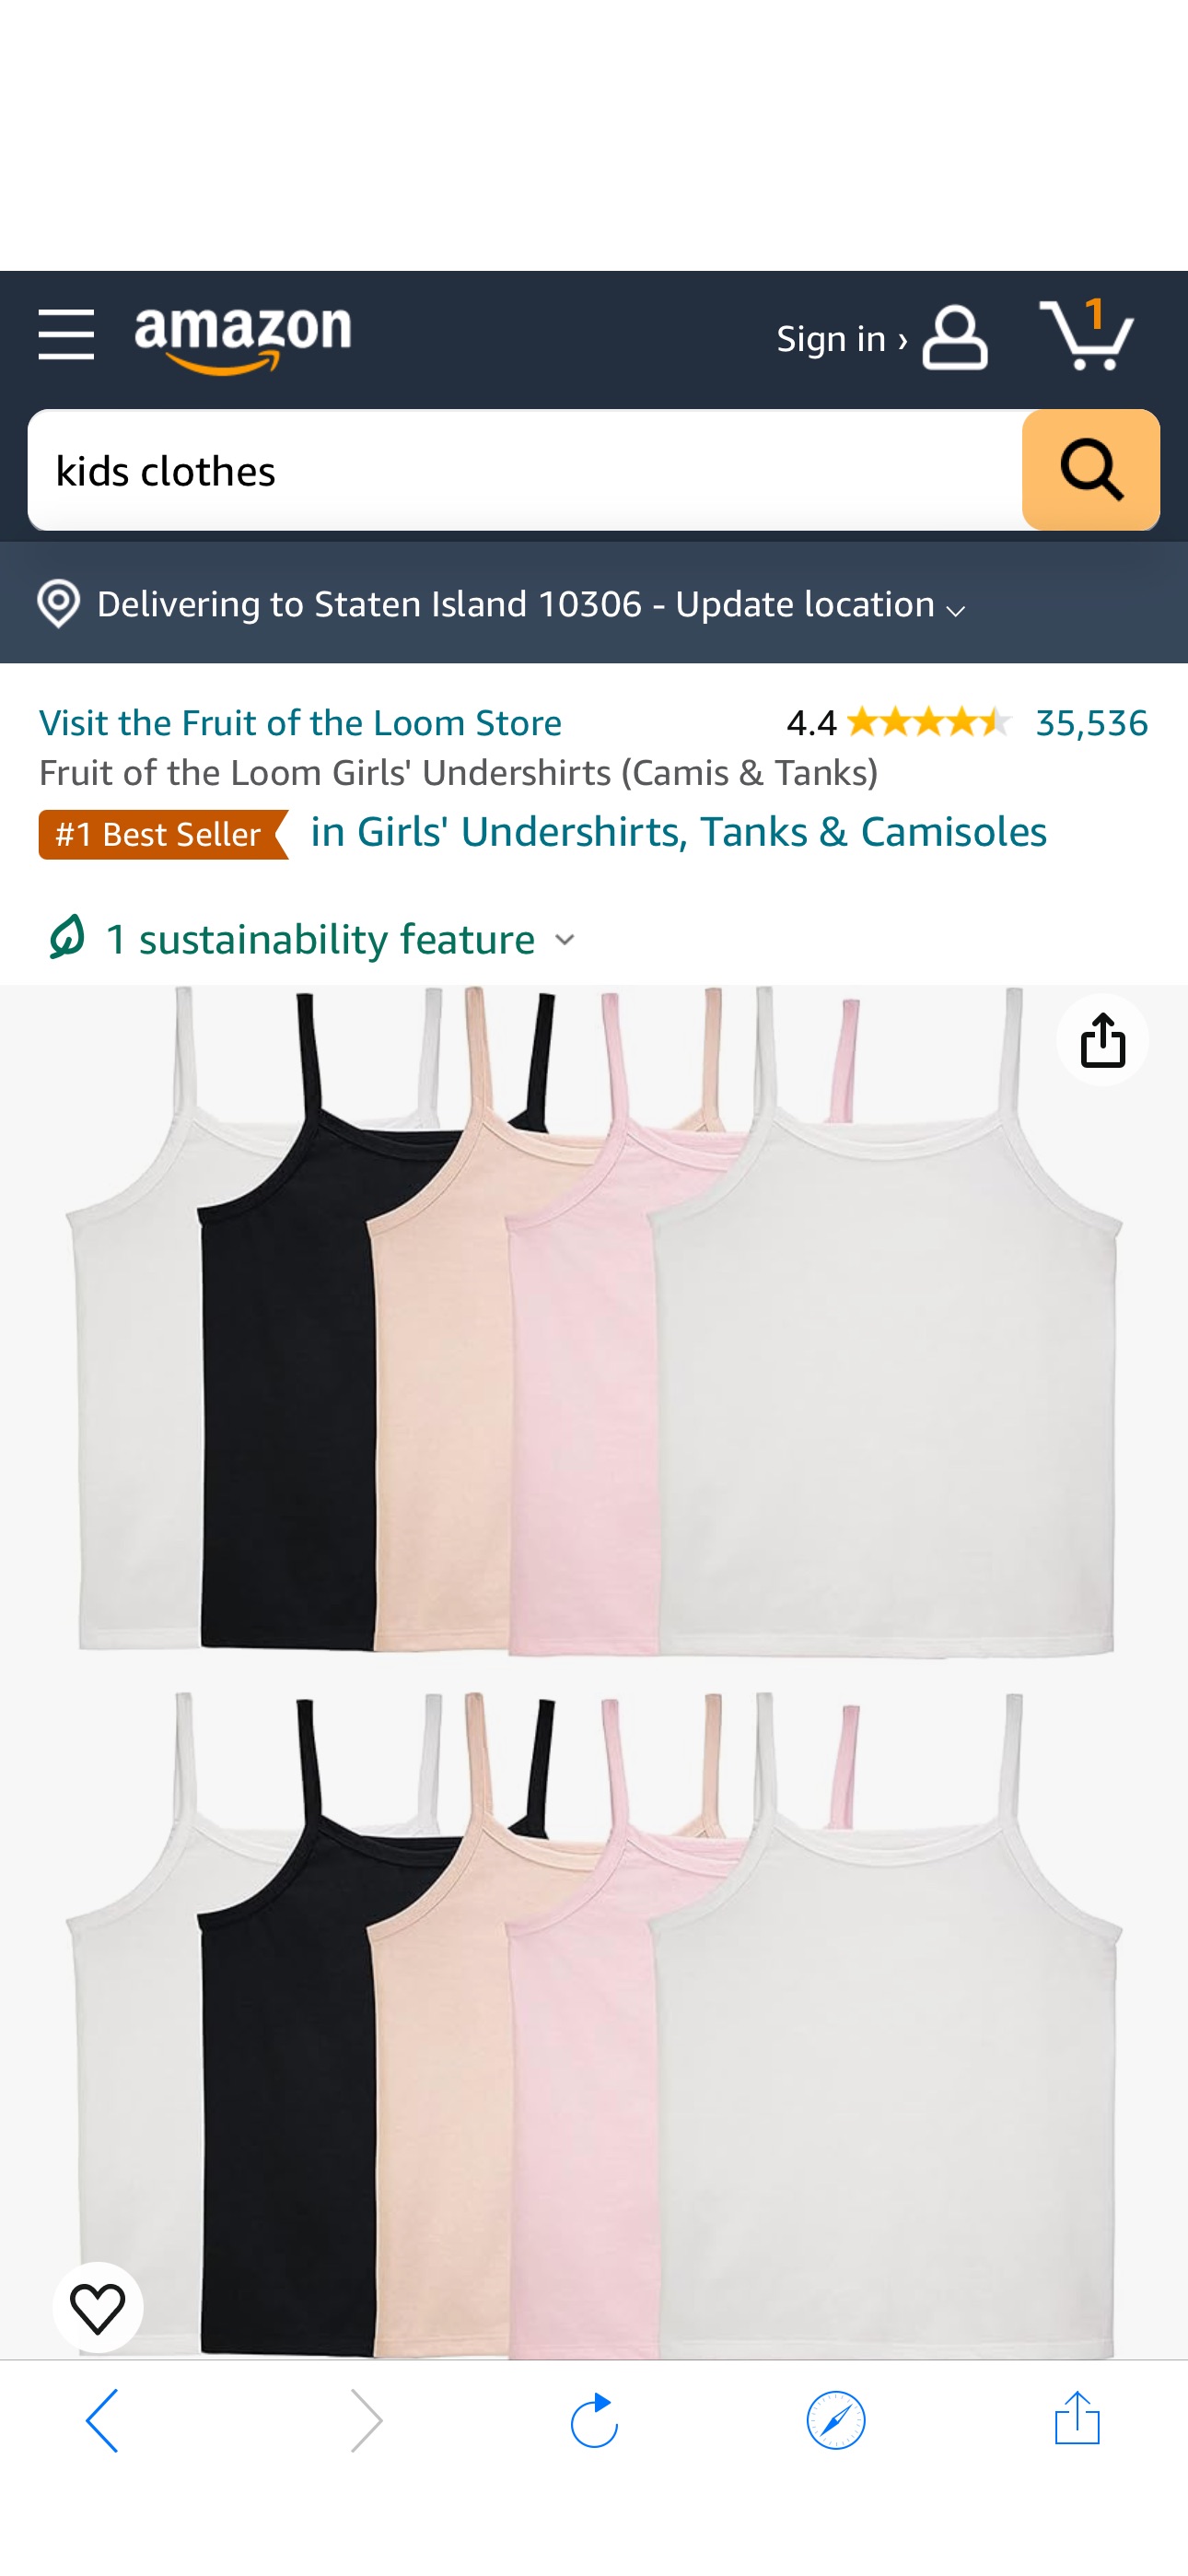 Amazon.com: Fruit of the Loom Girls' Undershirts (Camis & Tanks), Cami-10 Pack-Assorted, Medium: Clothing, Shoes & Jewelry